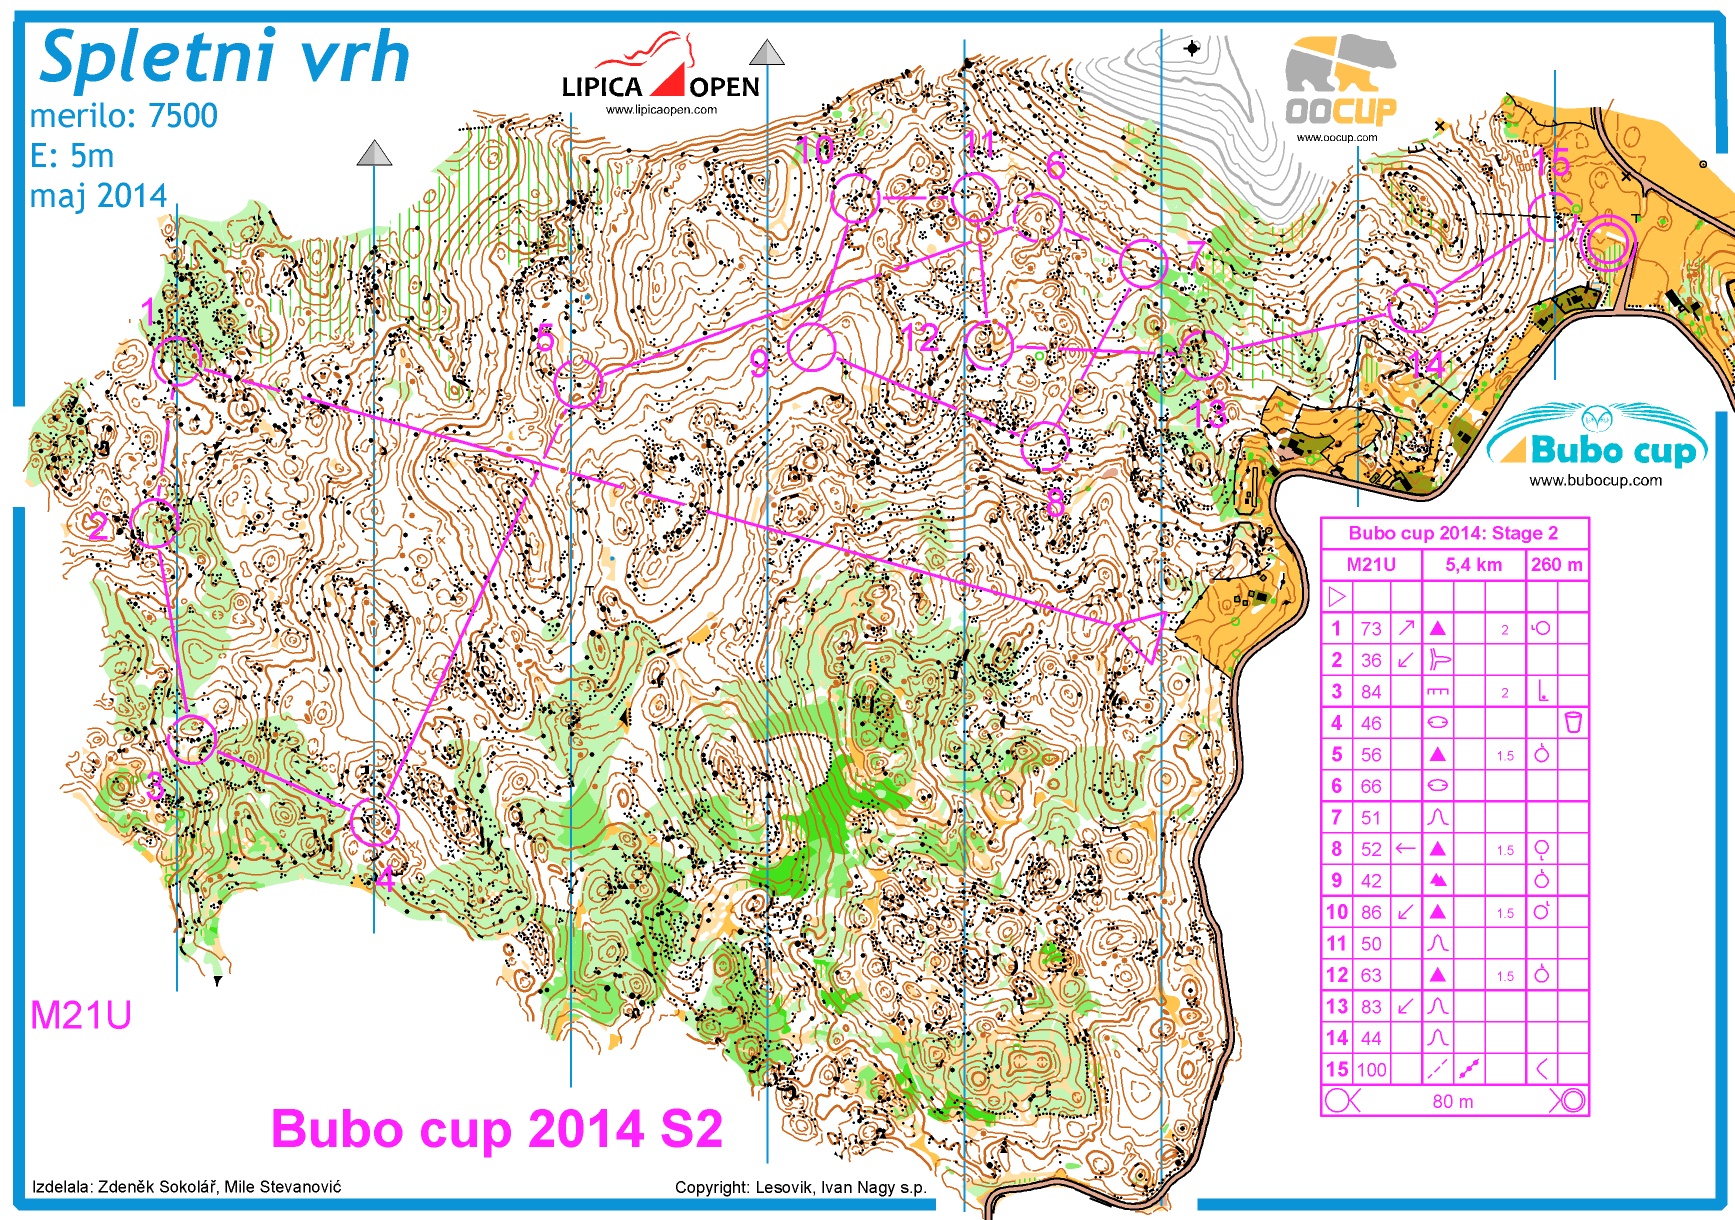 Bubo cup 2014 M21U Stage2 (25.07.2014)